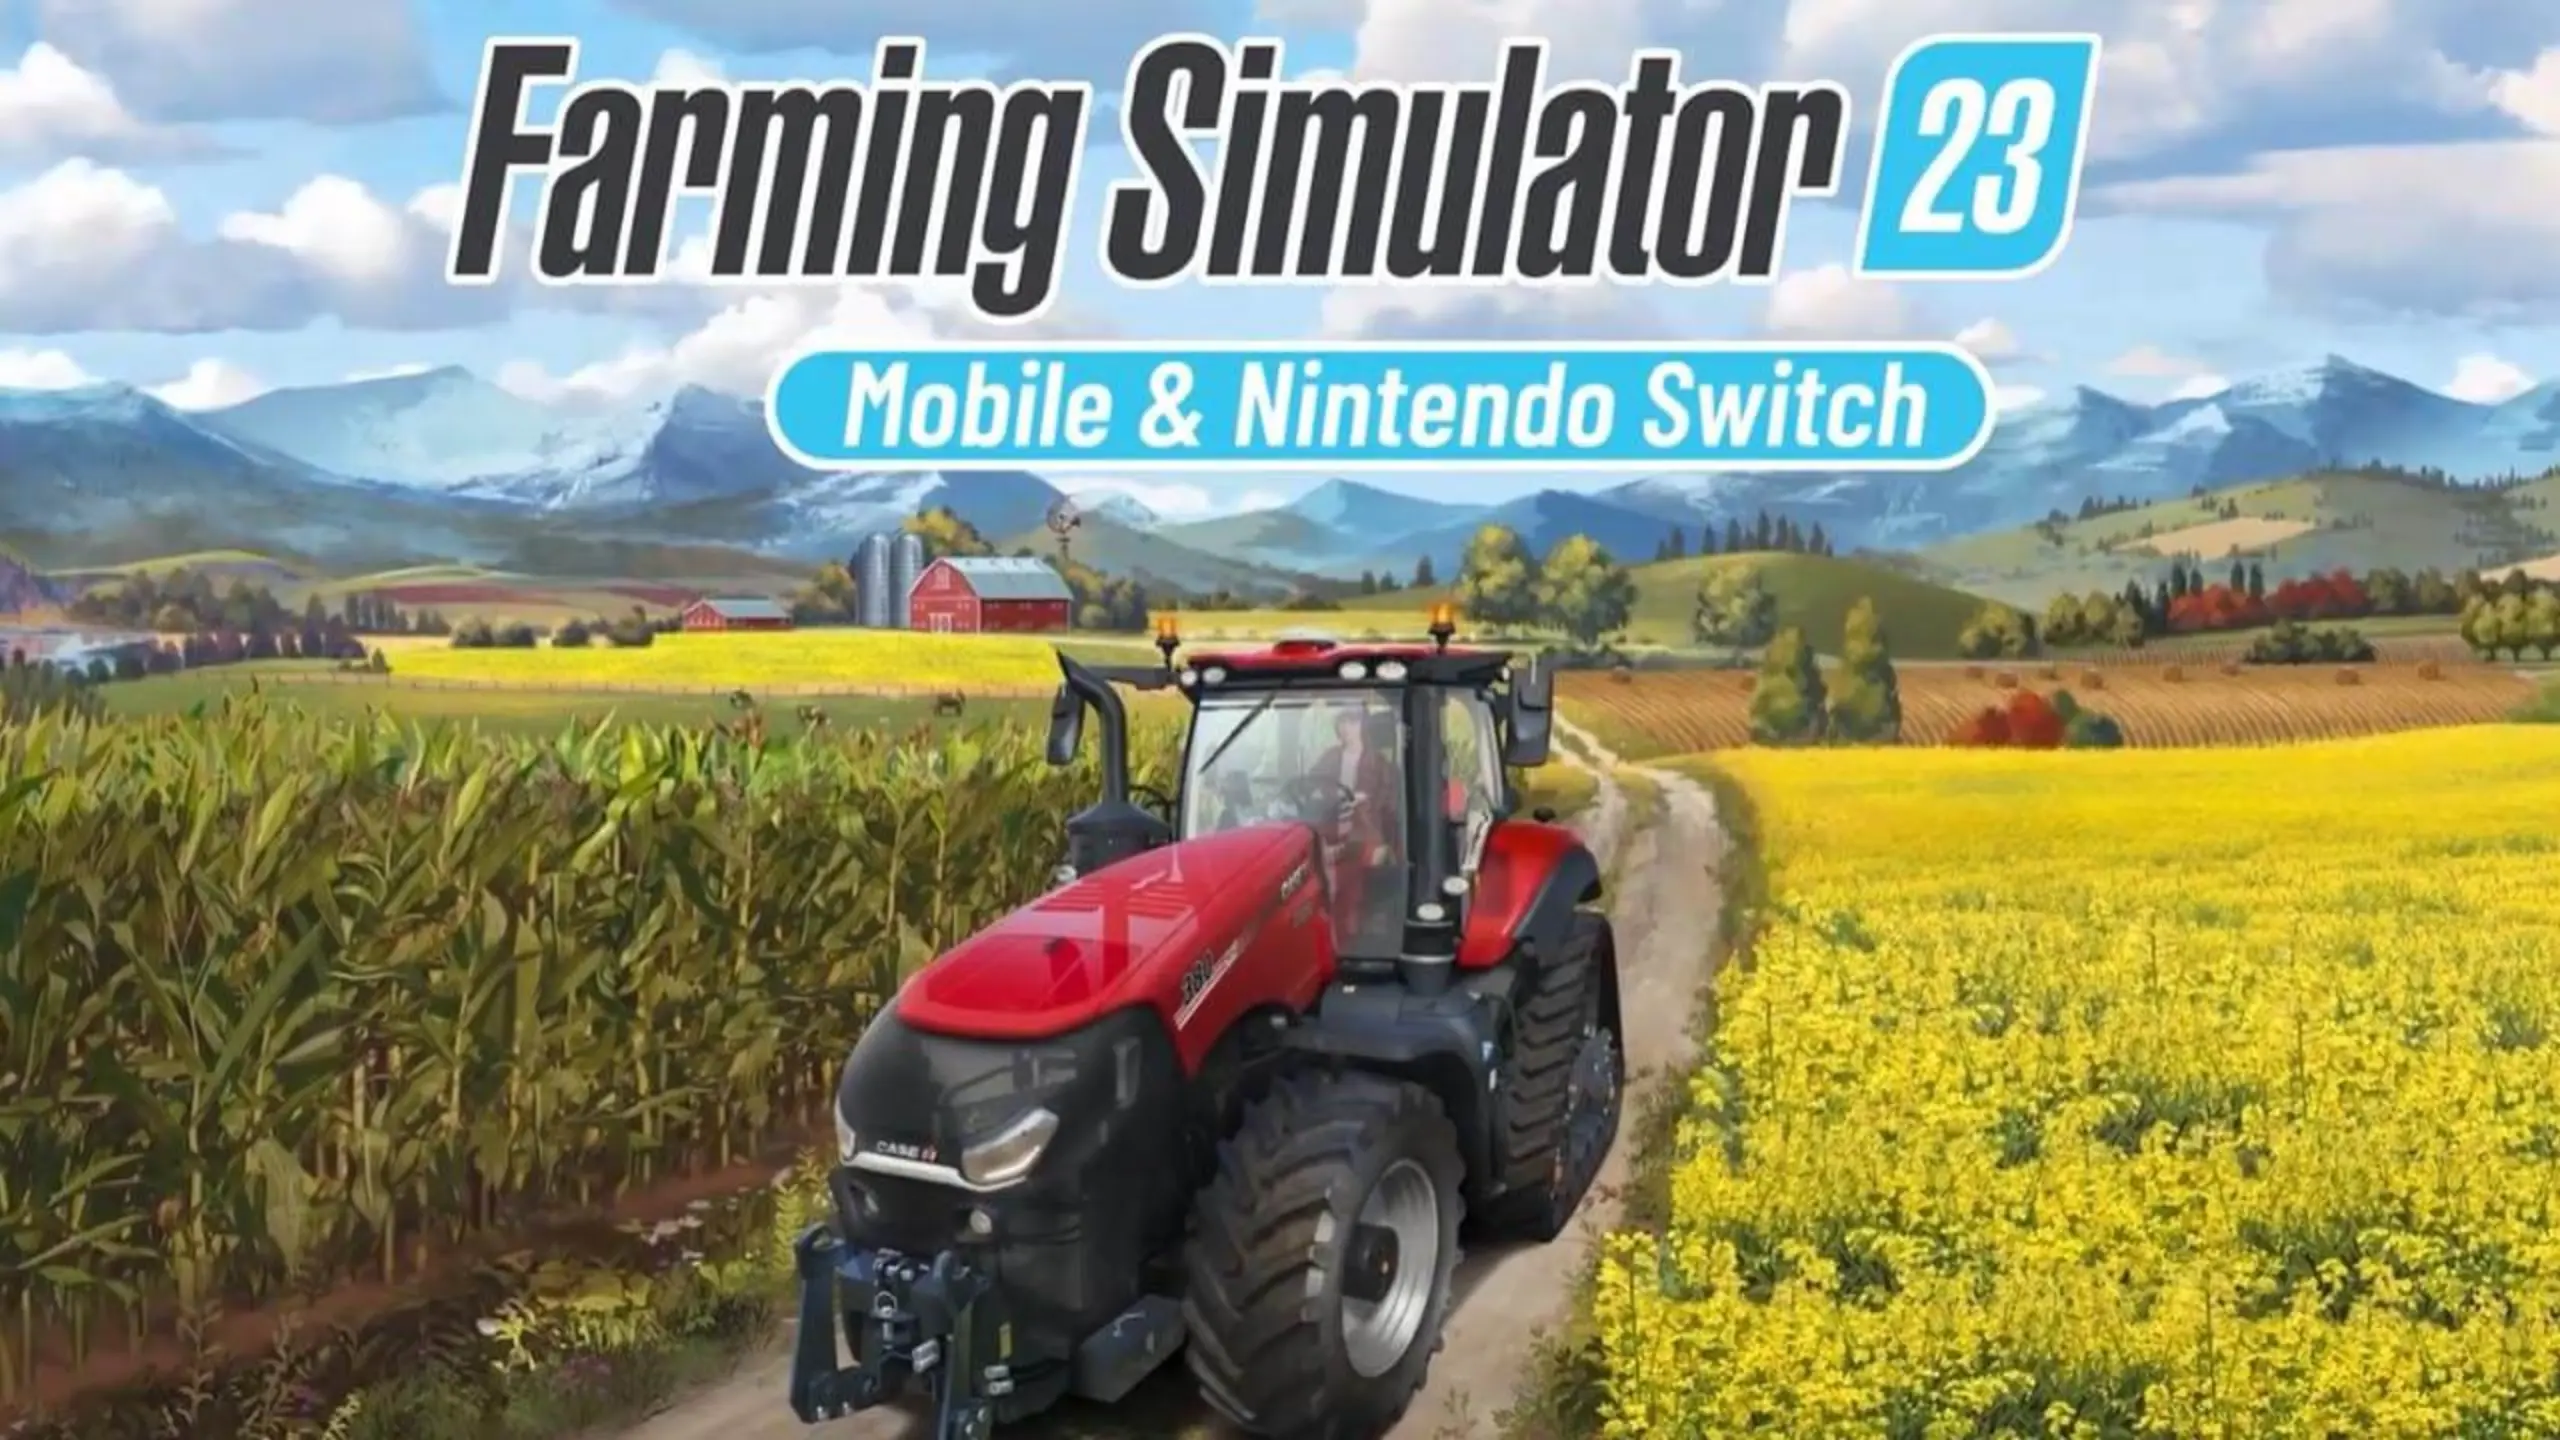 How to Download Farming Simulator 23 on Mobile